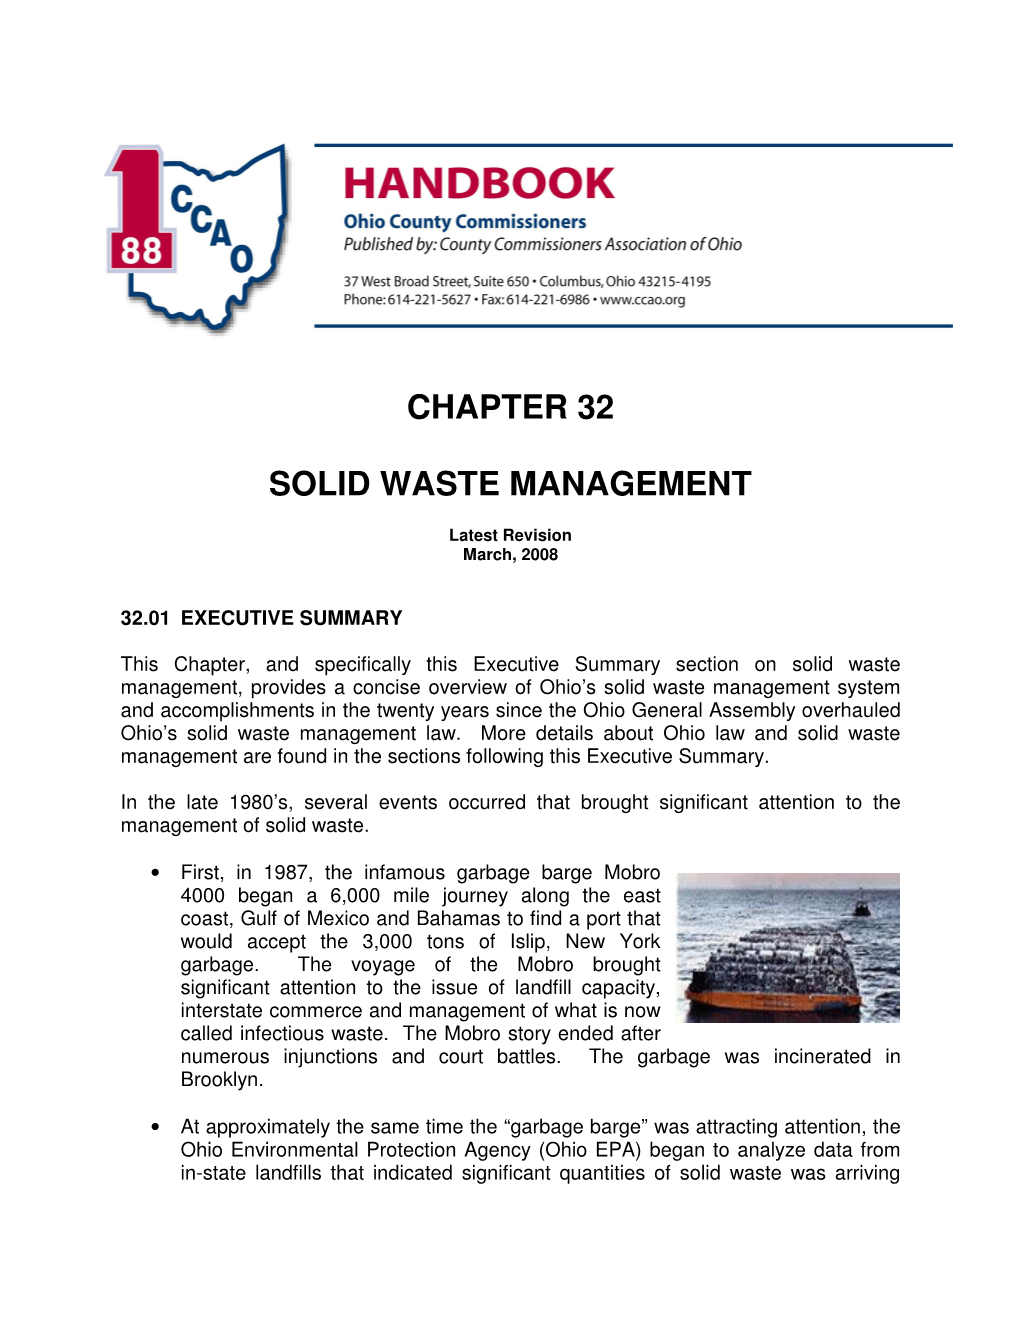 Chapter 32 Solid Waste Management